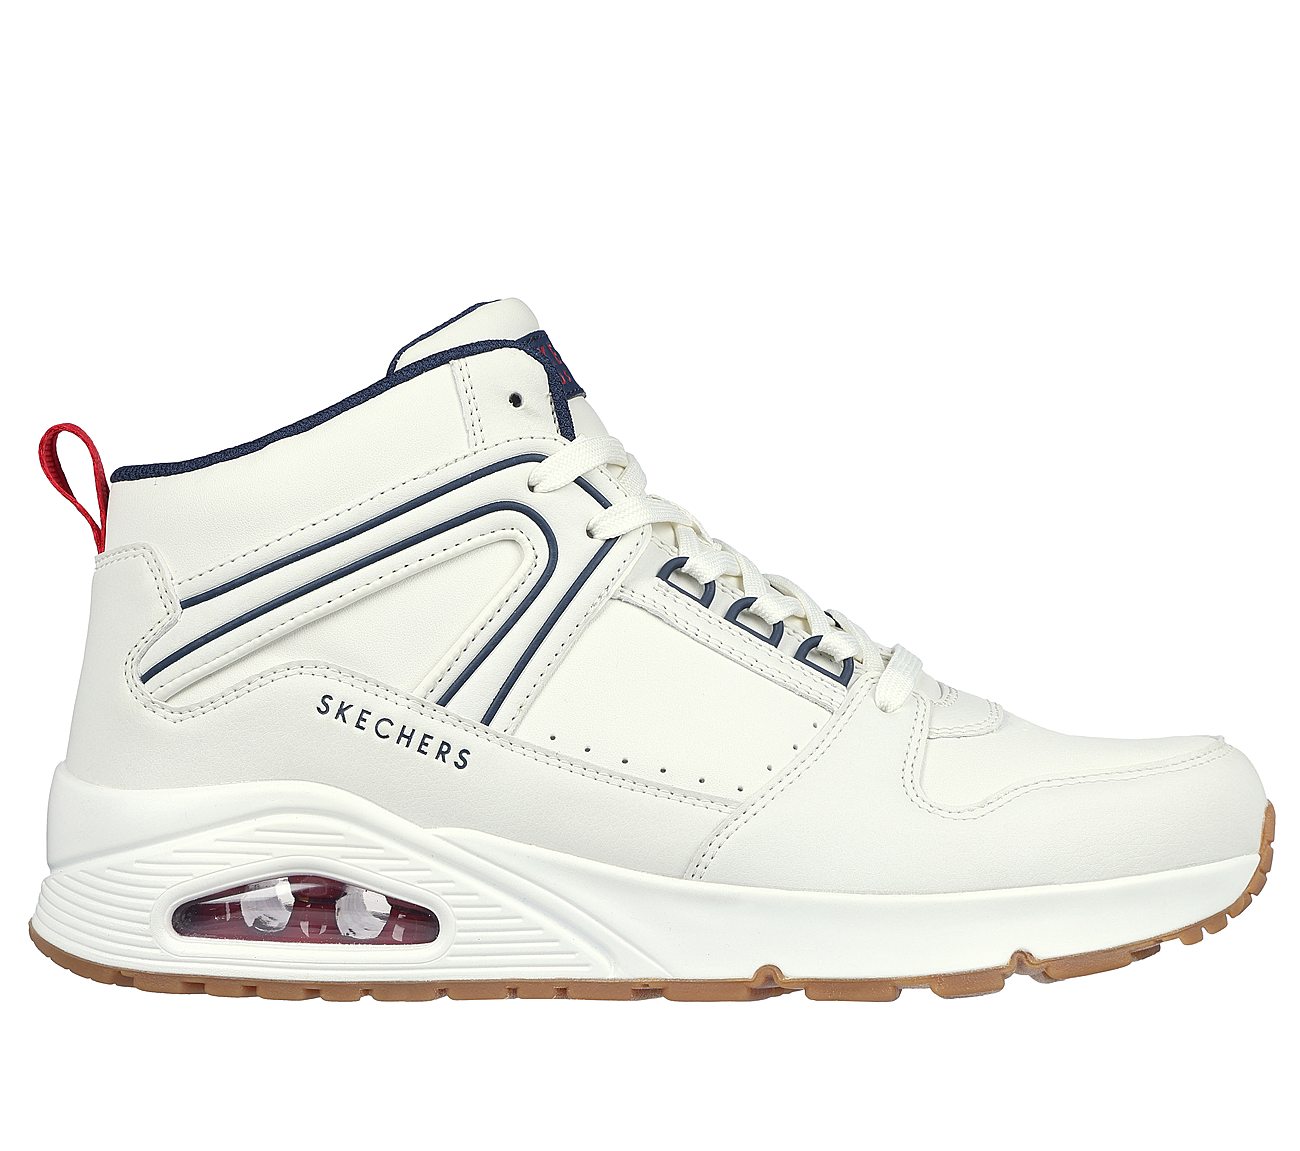 UNO - KEEP CLOSE, WHITE/NAVY/RED Footwear Lateral View